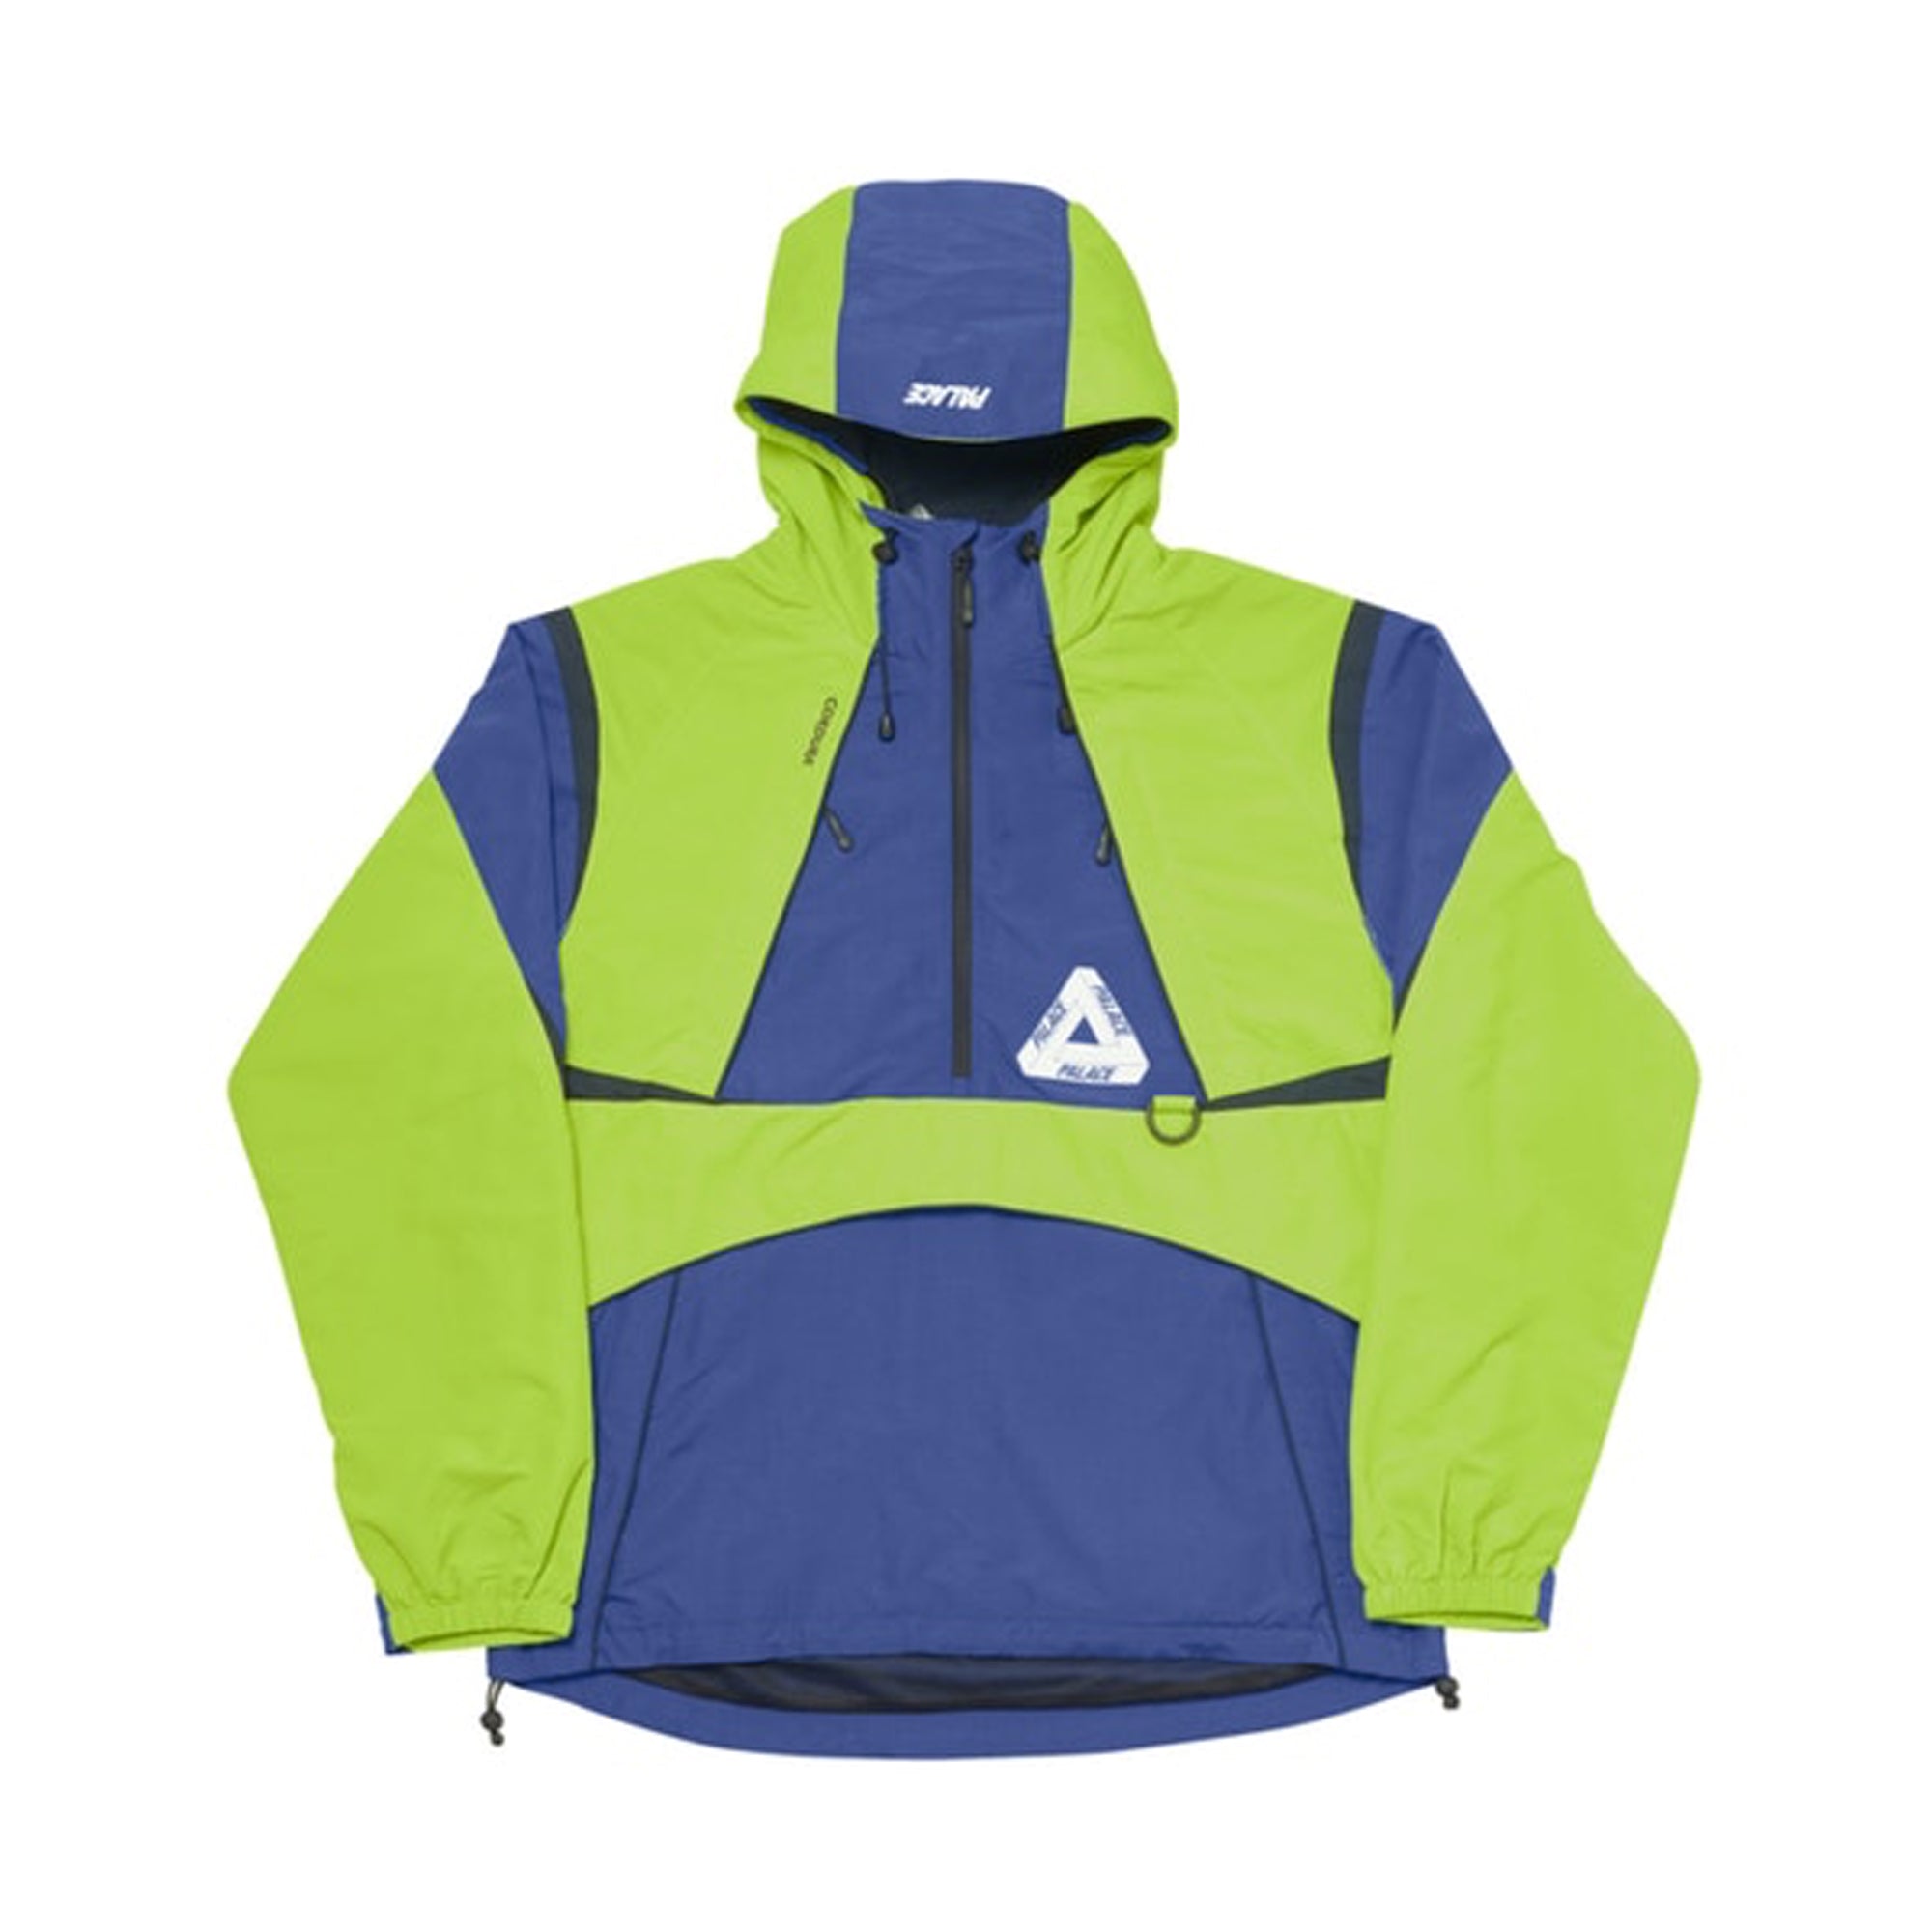 Palace P-Dura Shell Top Lime/Navy/Black-PLUS